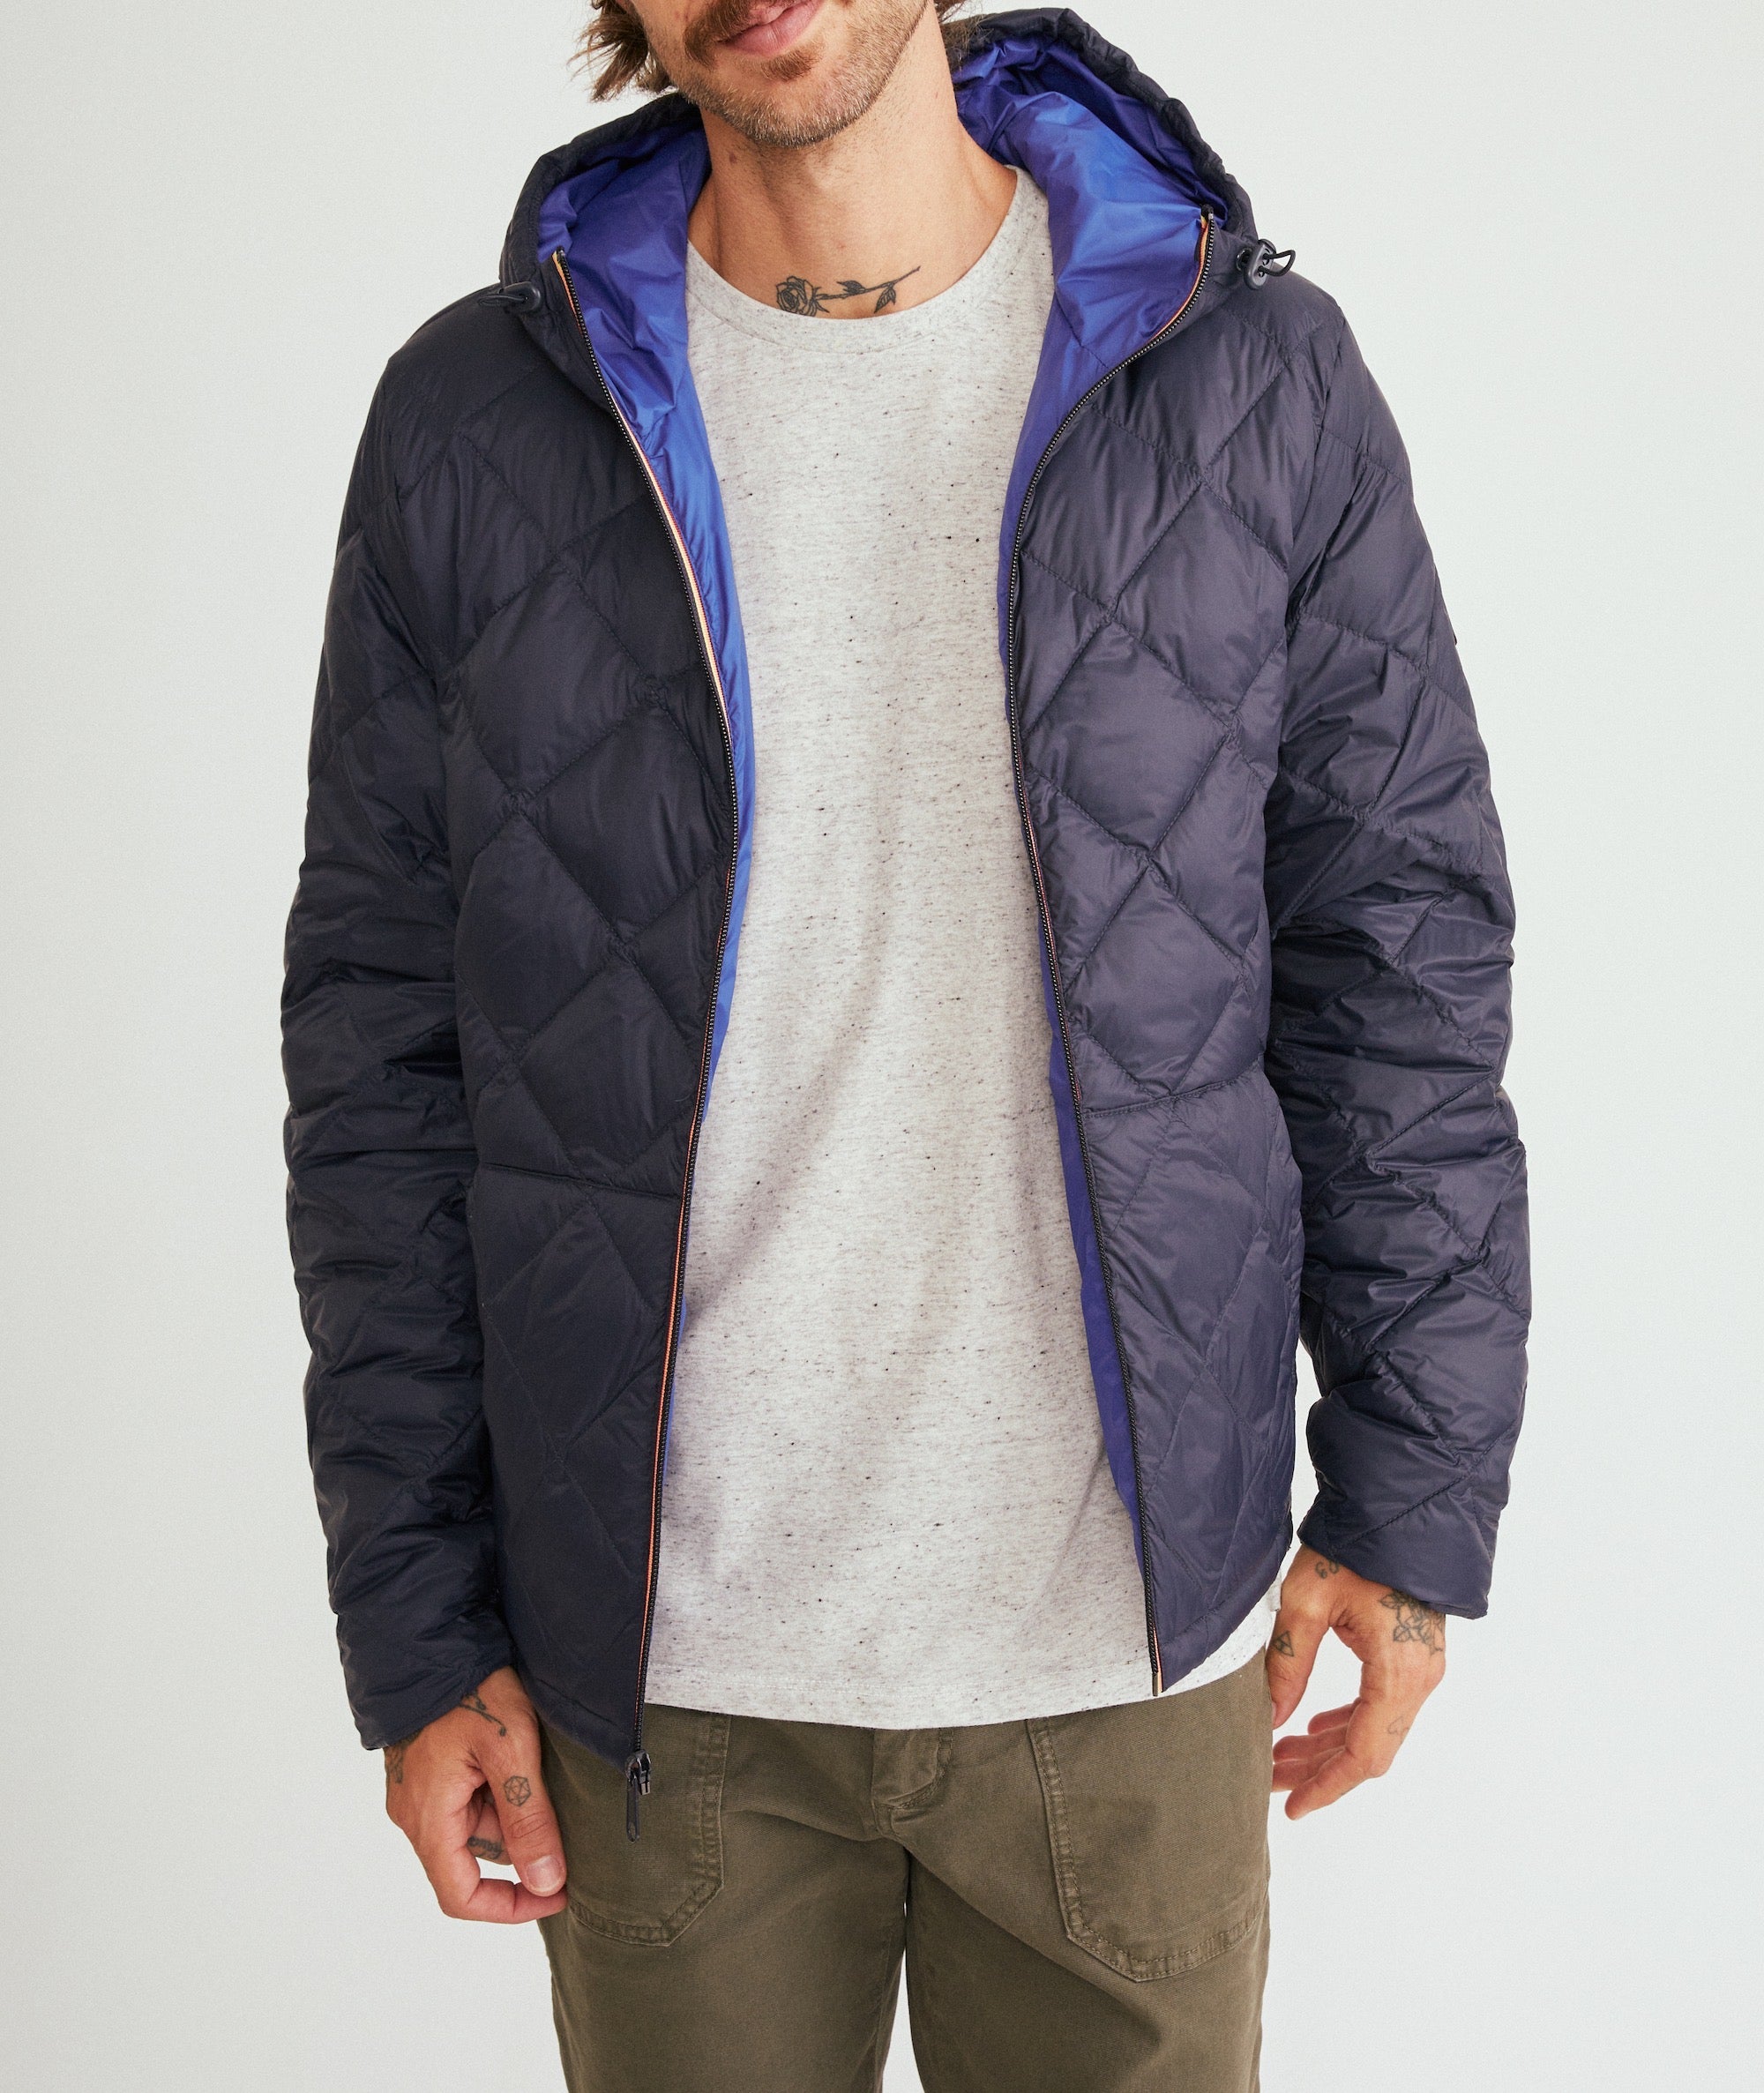 CAPTAINS HELM QUILTED WARM JKT キャプテンズヘルム 年中最低価格 